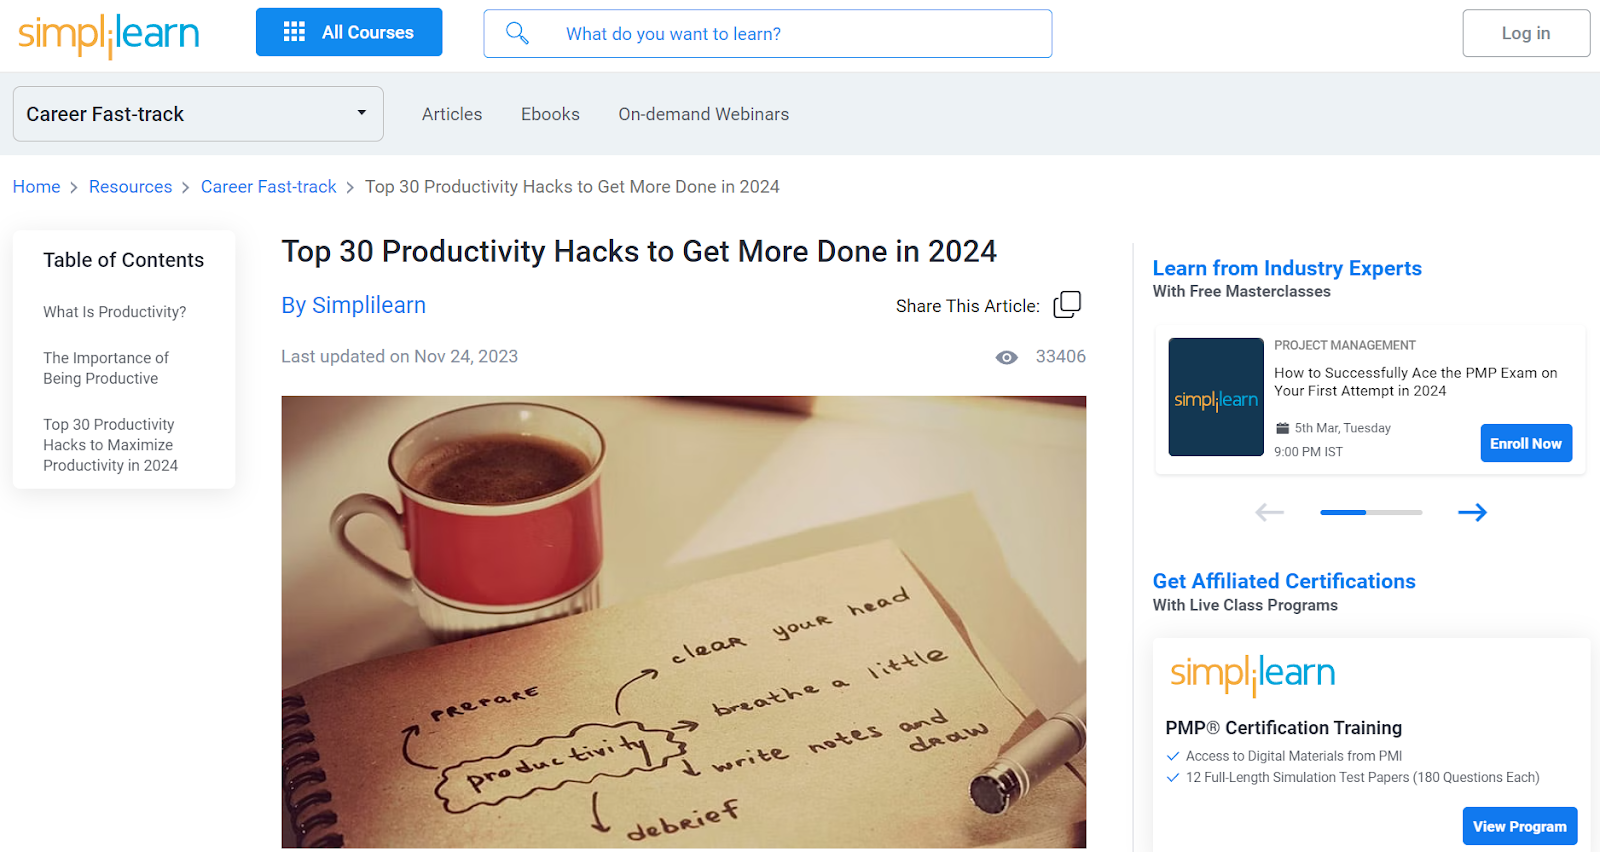 Simplilearn's Article: Top 30 Productivity Hacks to Get More Done in 2024